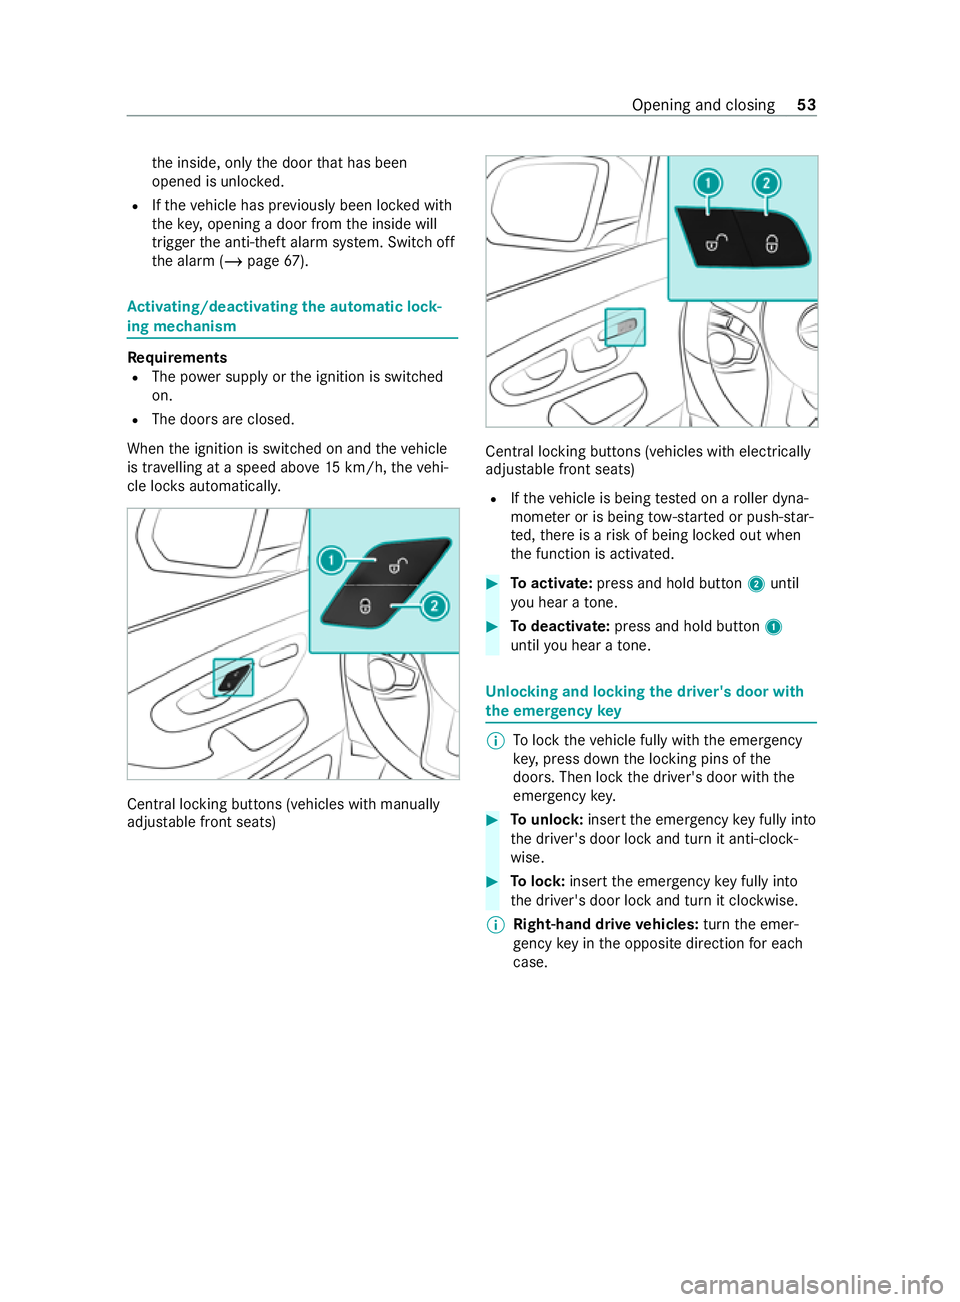 MERCEDES-BENZ V-CLASS MPV 2021  Owners Manual th
e inside, only the door that has been
opened is unlo cked.
R Ifth eve hicle has pr eviously been loc ked with
th eke y,opening a door from the inside will
trigger the anti- theft alarm sy stem. Swi